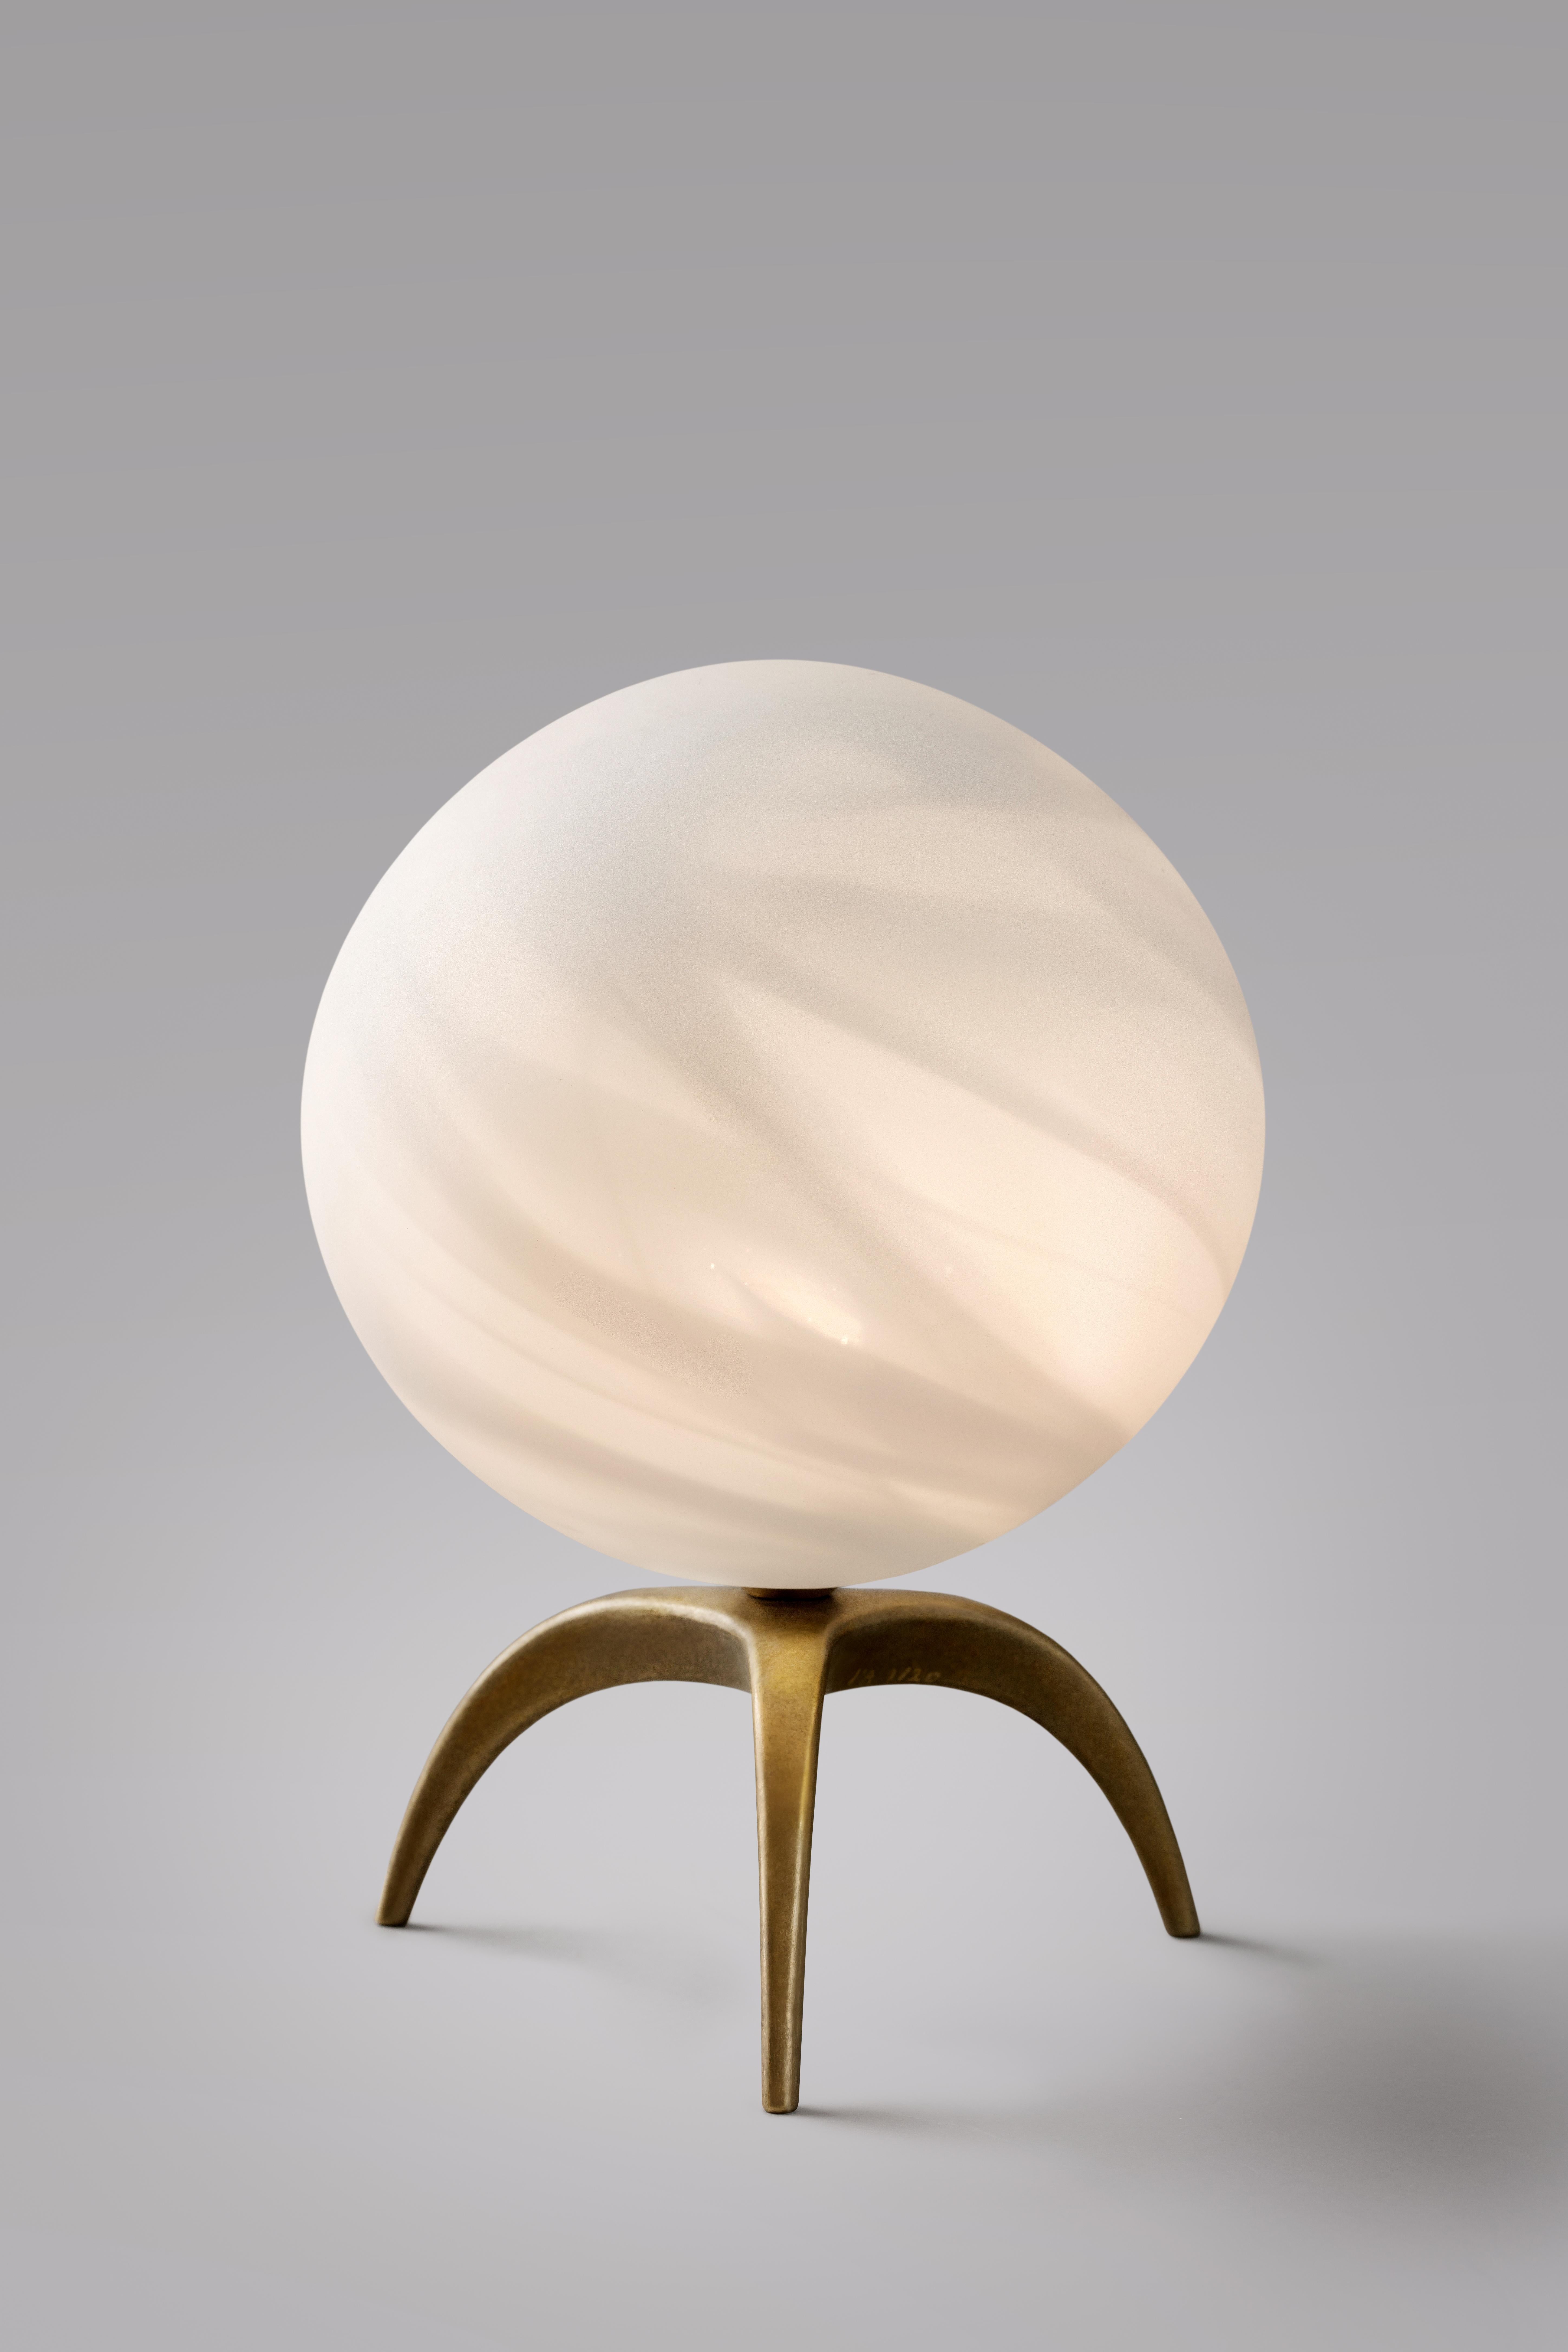 Jupiter blown glass table lamp - Ludovic Clément d’Armont
Blown glass and brass.
Dimensions: 30 x 20 x 20 cm.

Ludovic Clément d’Armont is in the continuation of a family tradition of centuries of gentle glassmakers, painters, carpenters and